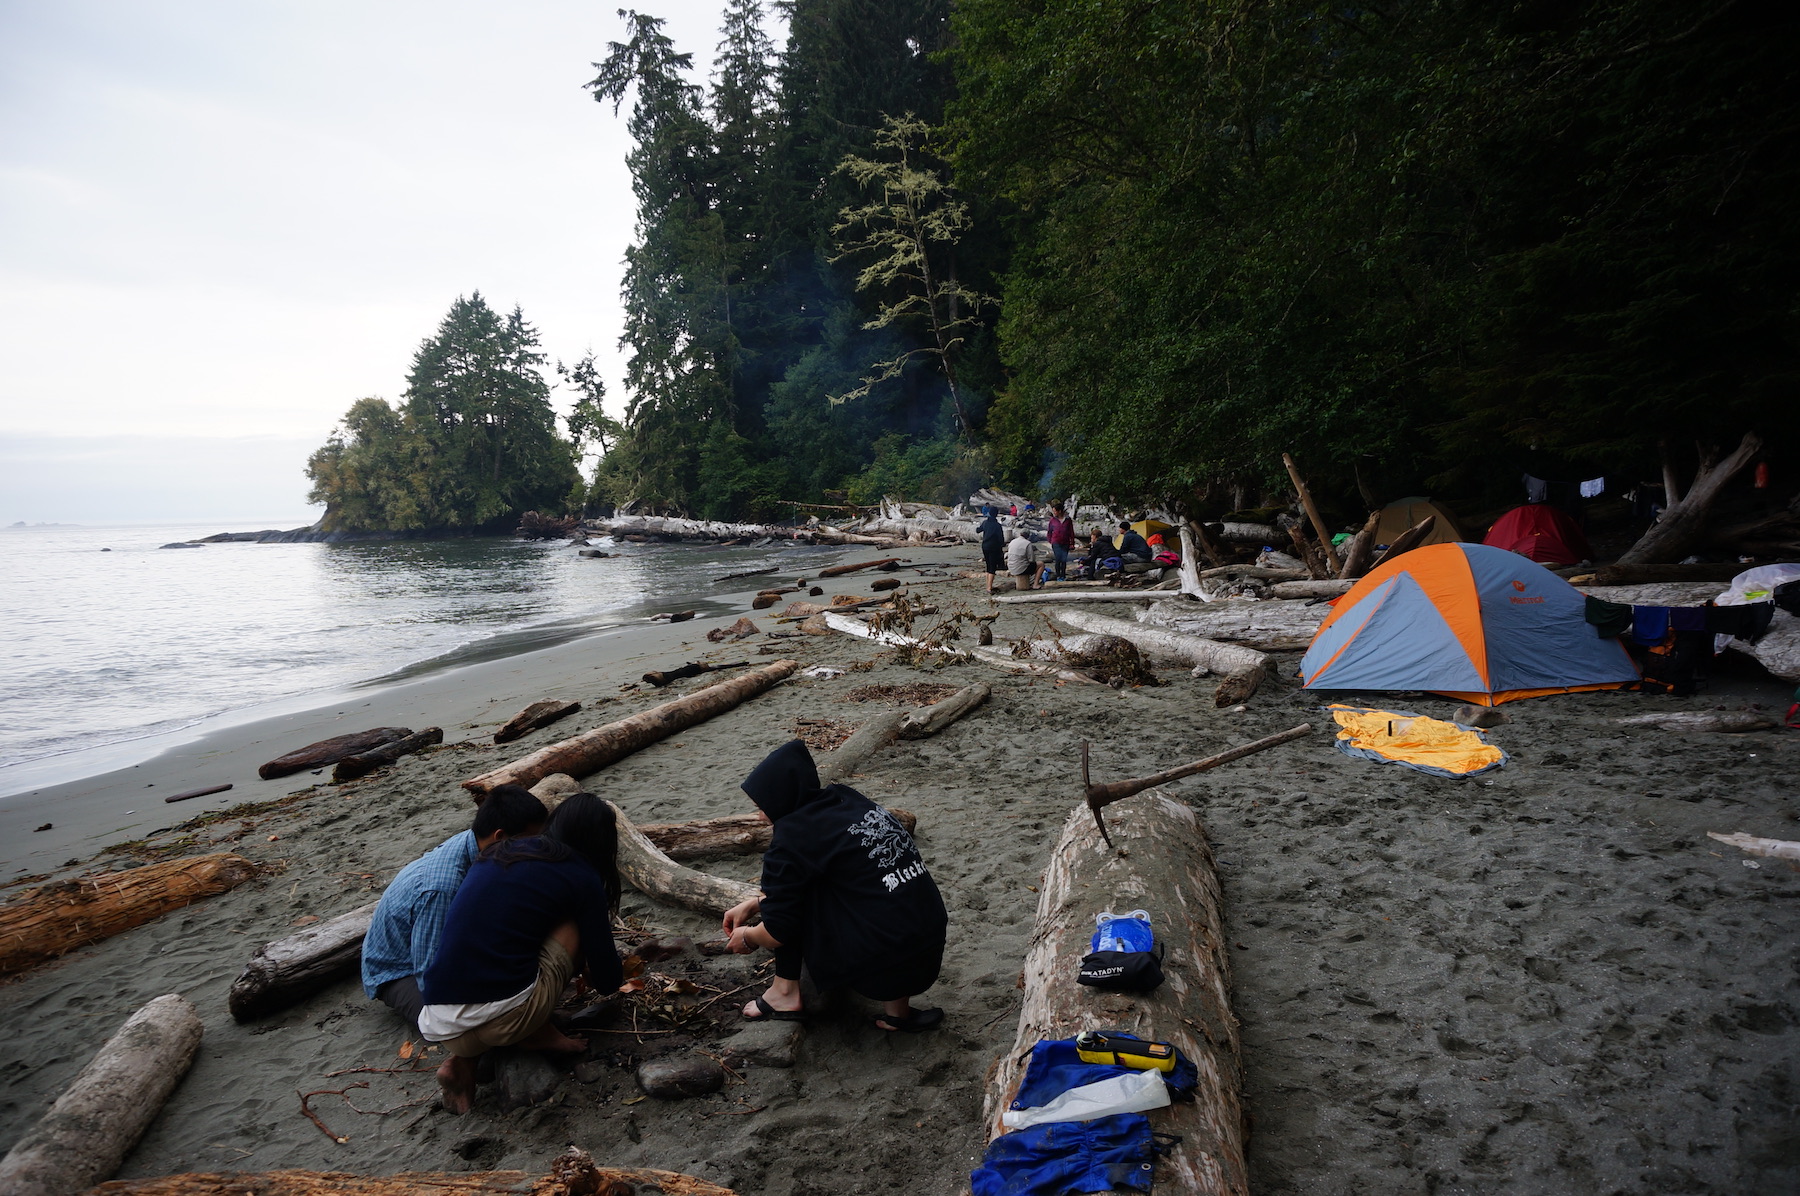 Camping in designated beach zones. You're allowed to forage a driftwood fire.